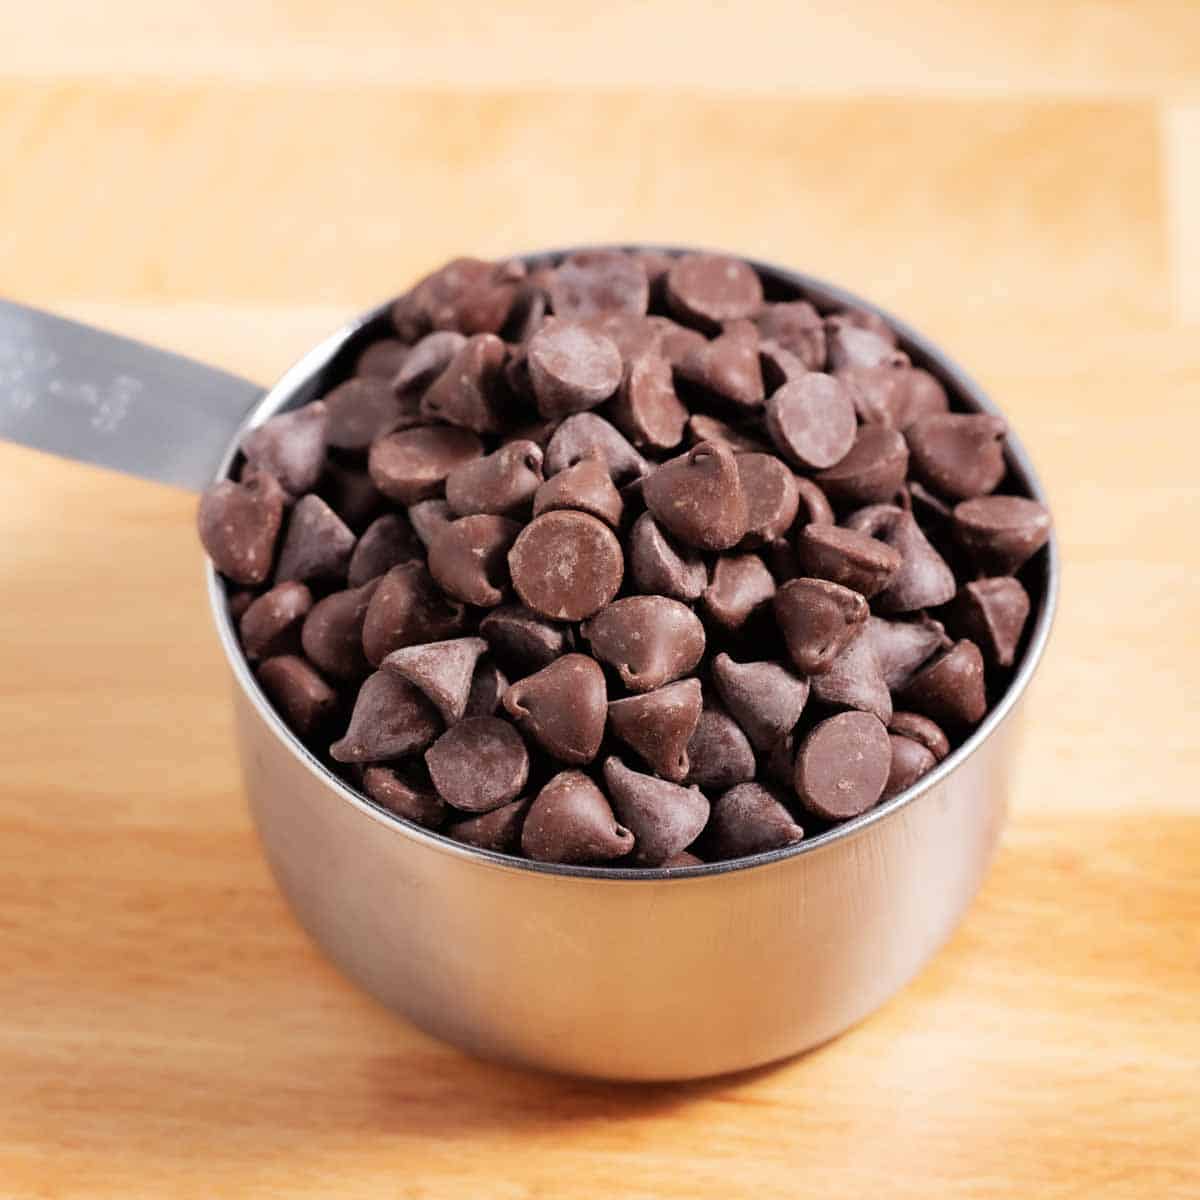 Metal measuring cup filled with chocolate chips.